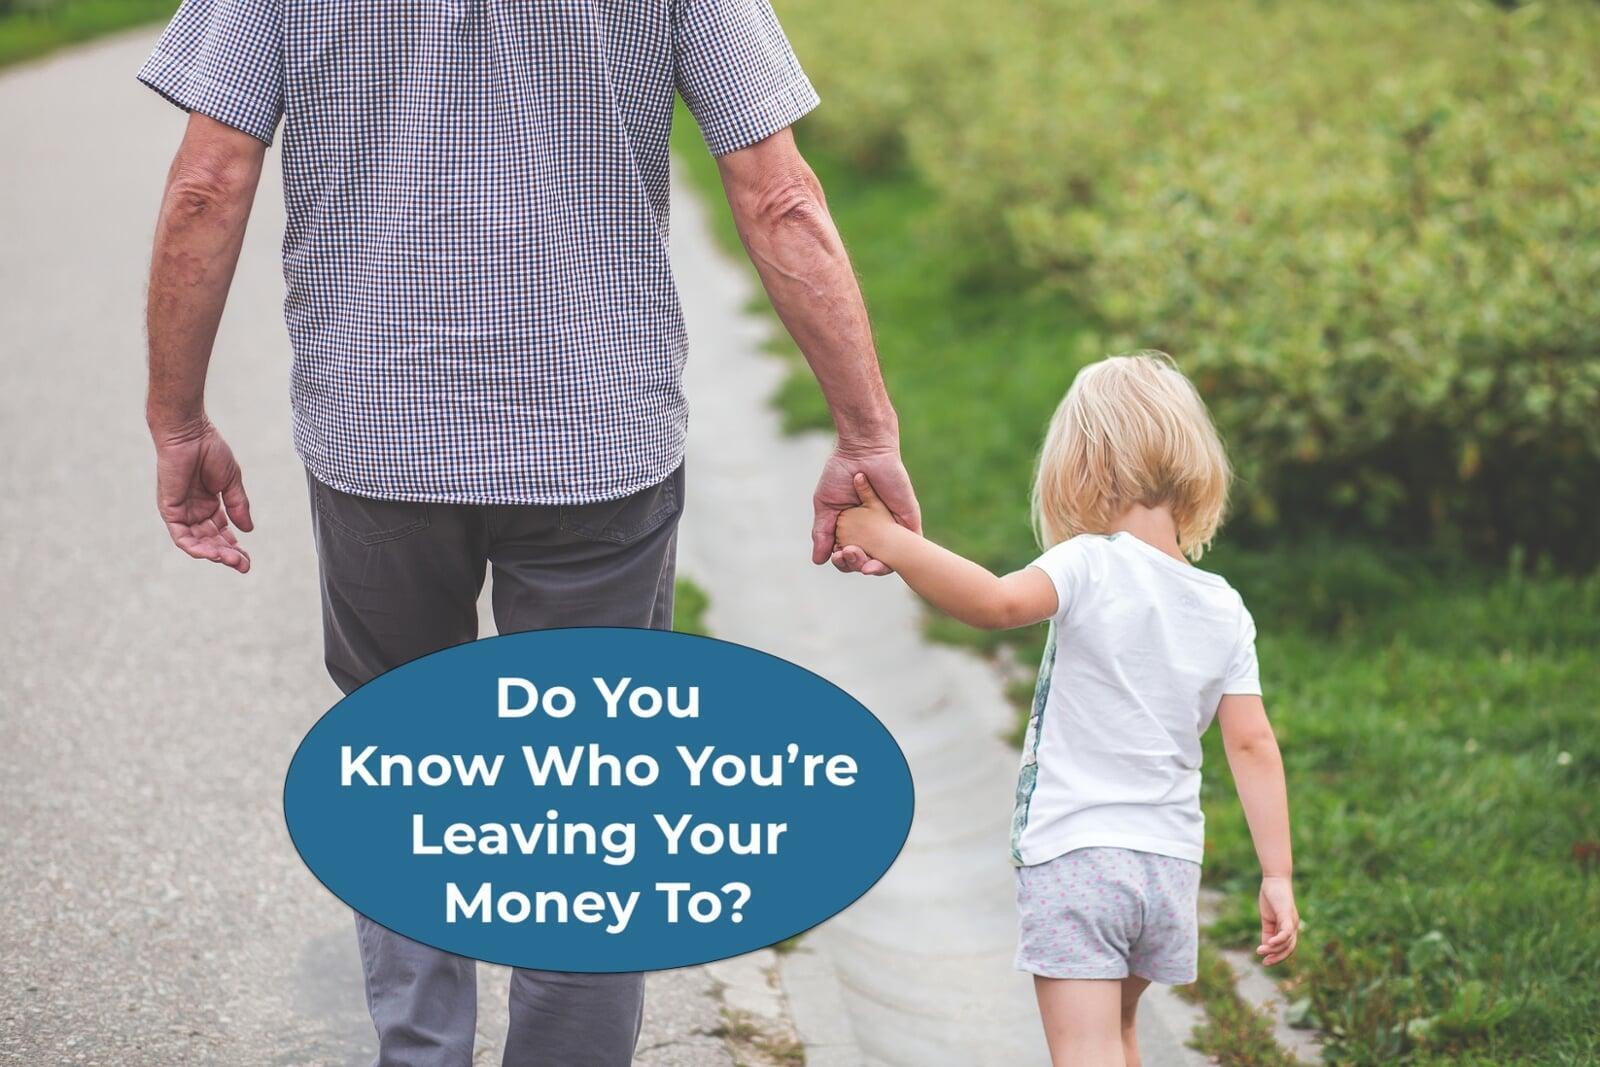 Do You Know Who You're Leaving Your Money To?